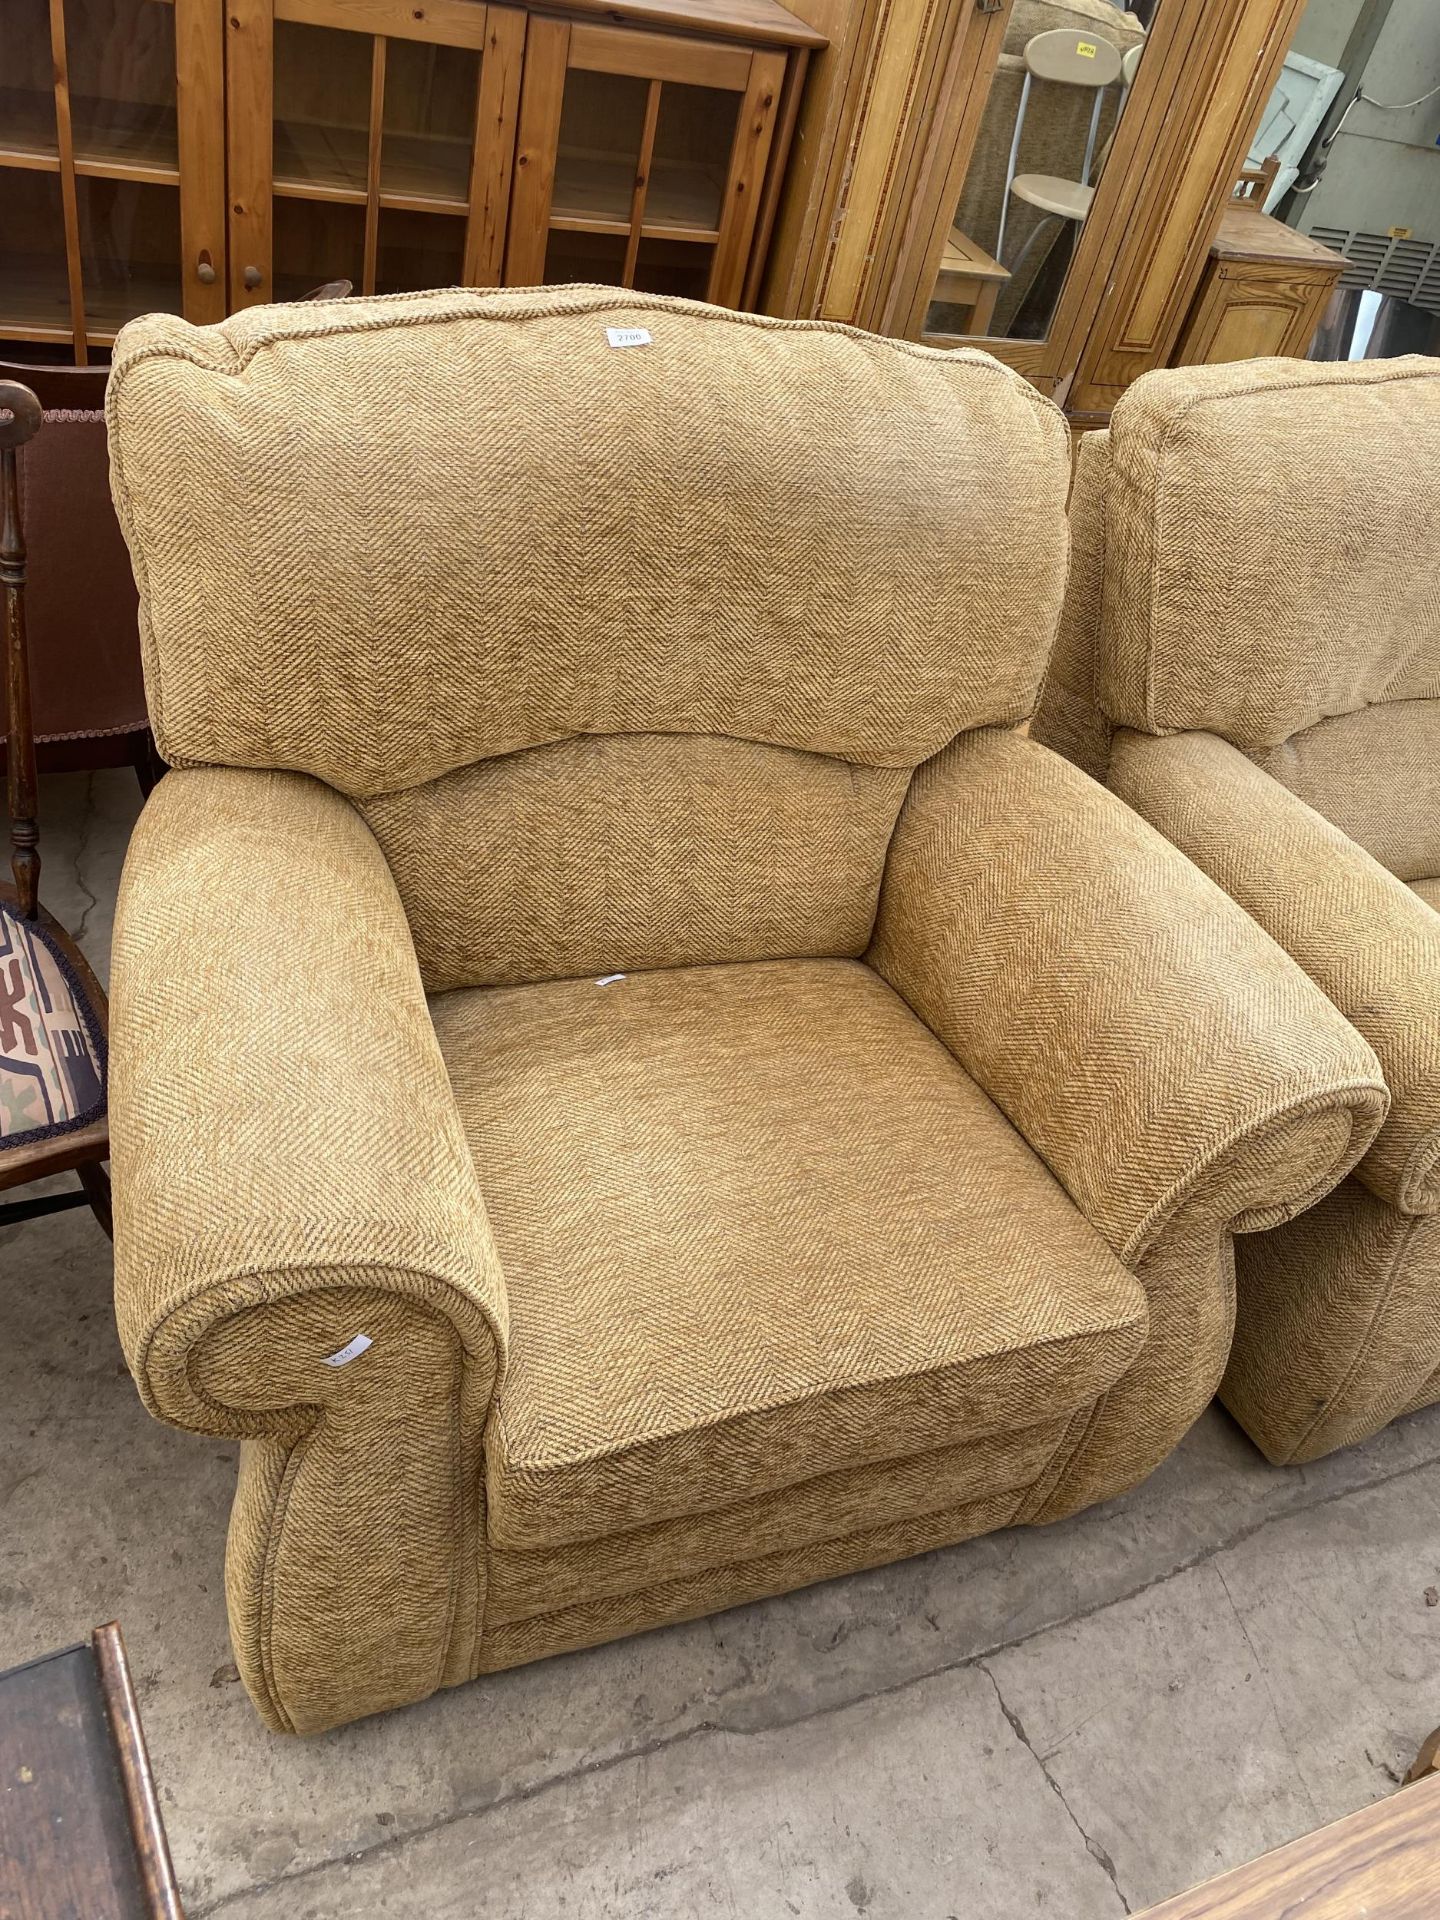 A MODERN BROWN THREE PIECE LOUNGE SUITE - Image 2 of 4